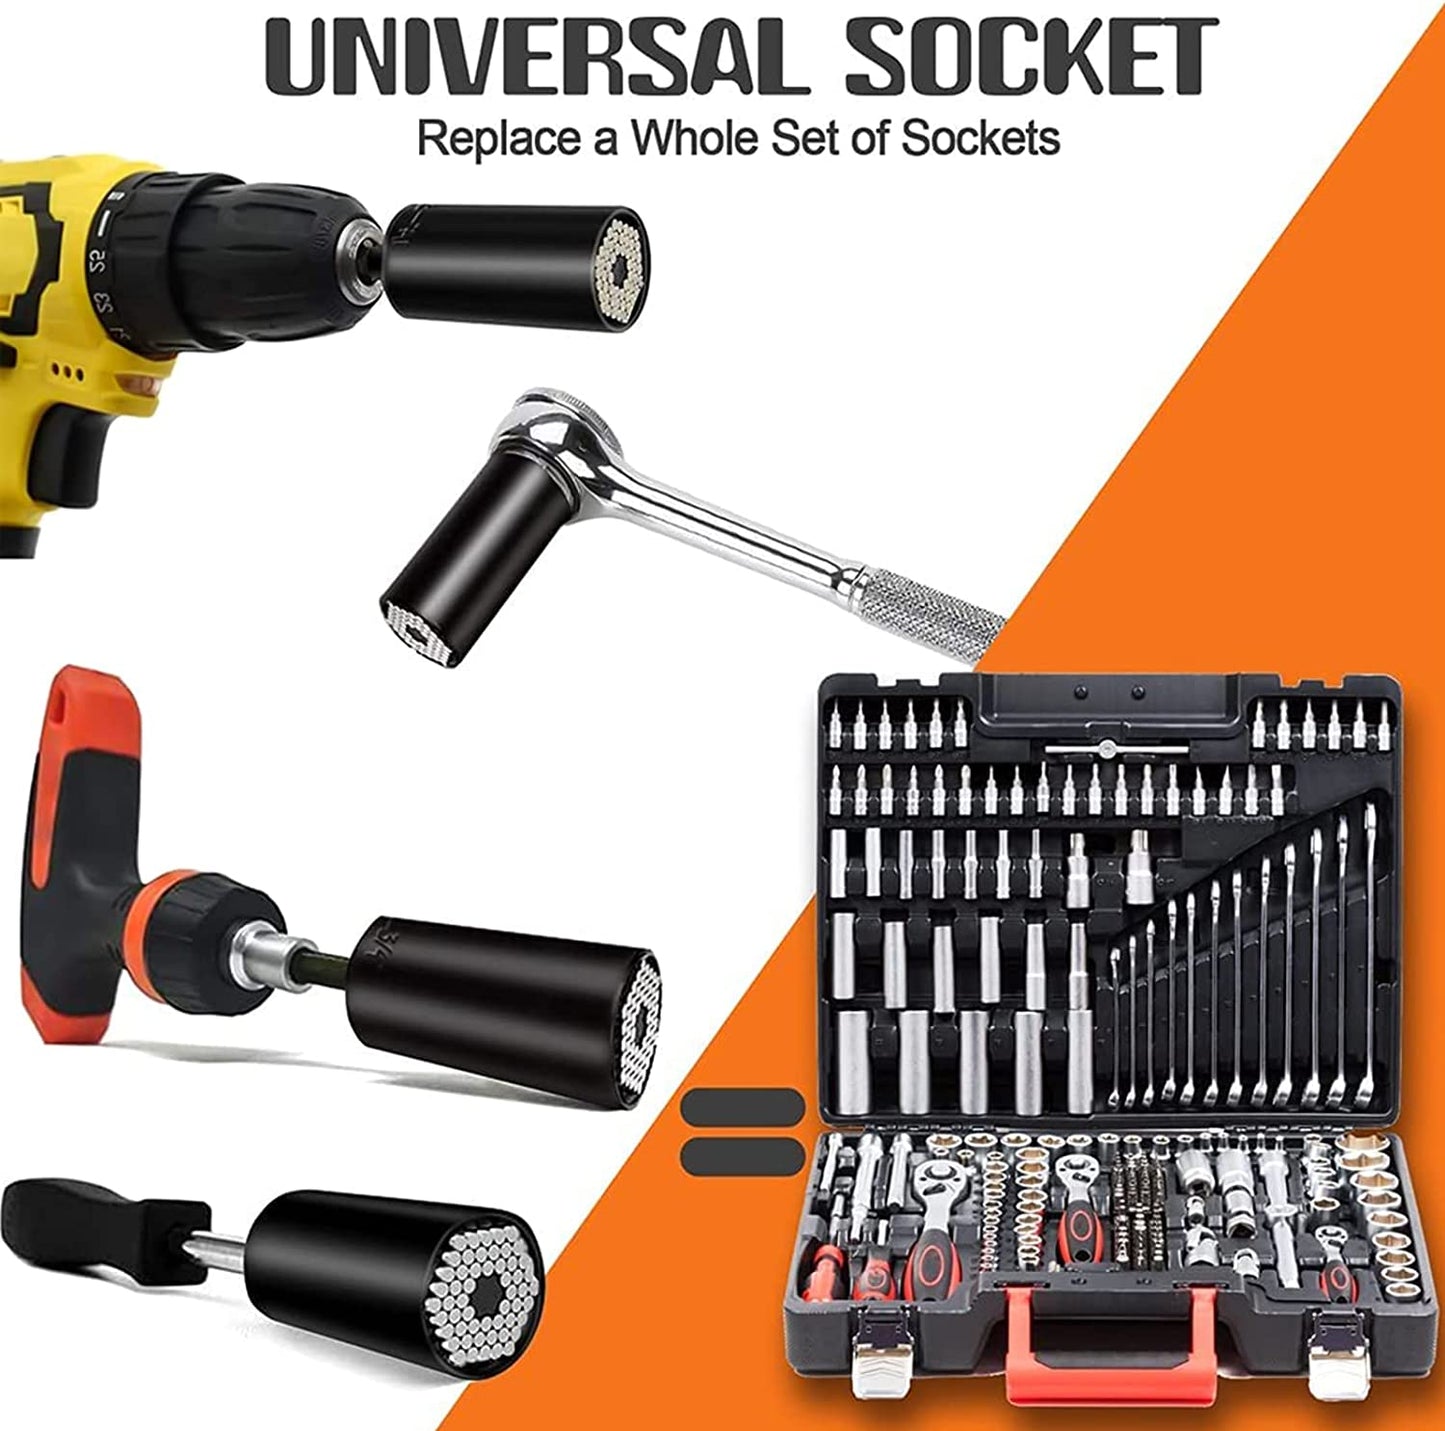 Universal Socket Tools 54 Durable Metal Pins and can Self-adjust to any size